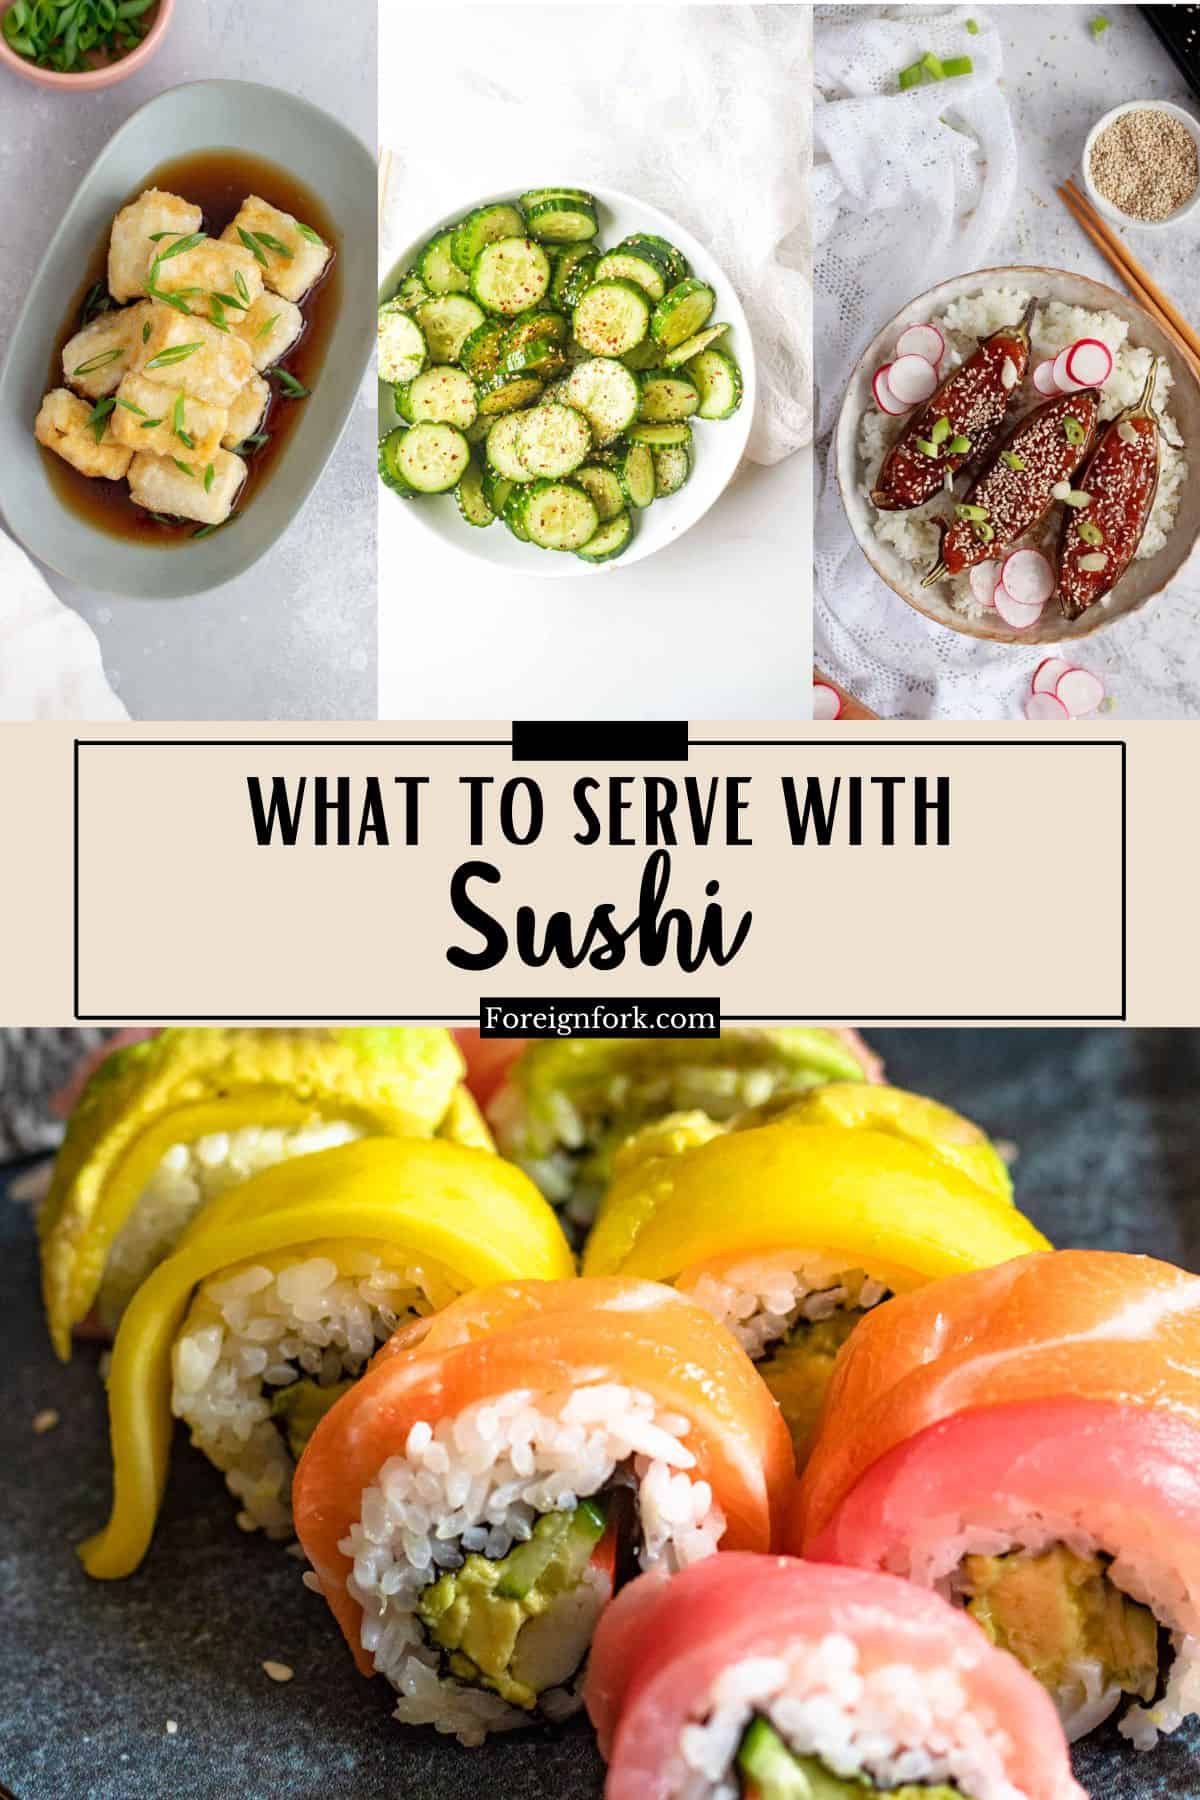 Title image showing 4 side dishes, one sushi roll, and the title "What to Serve with Sushi"